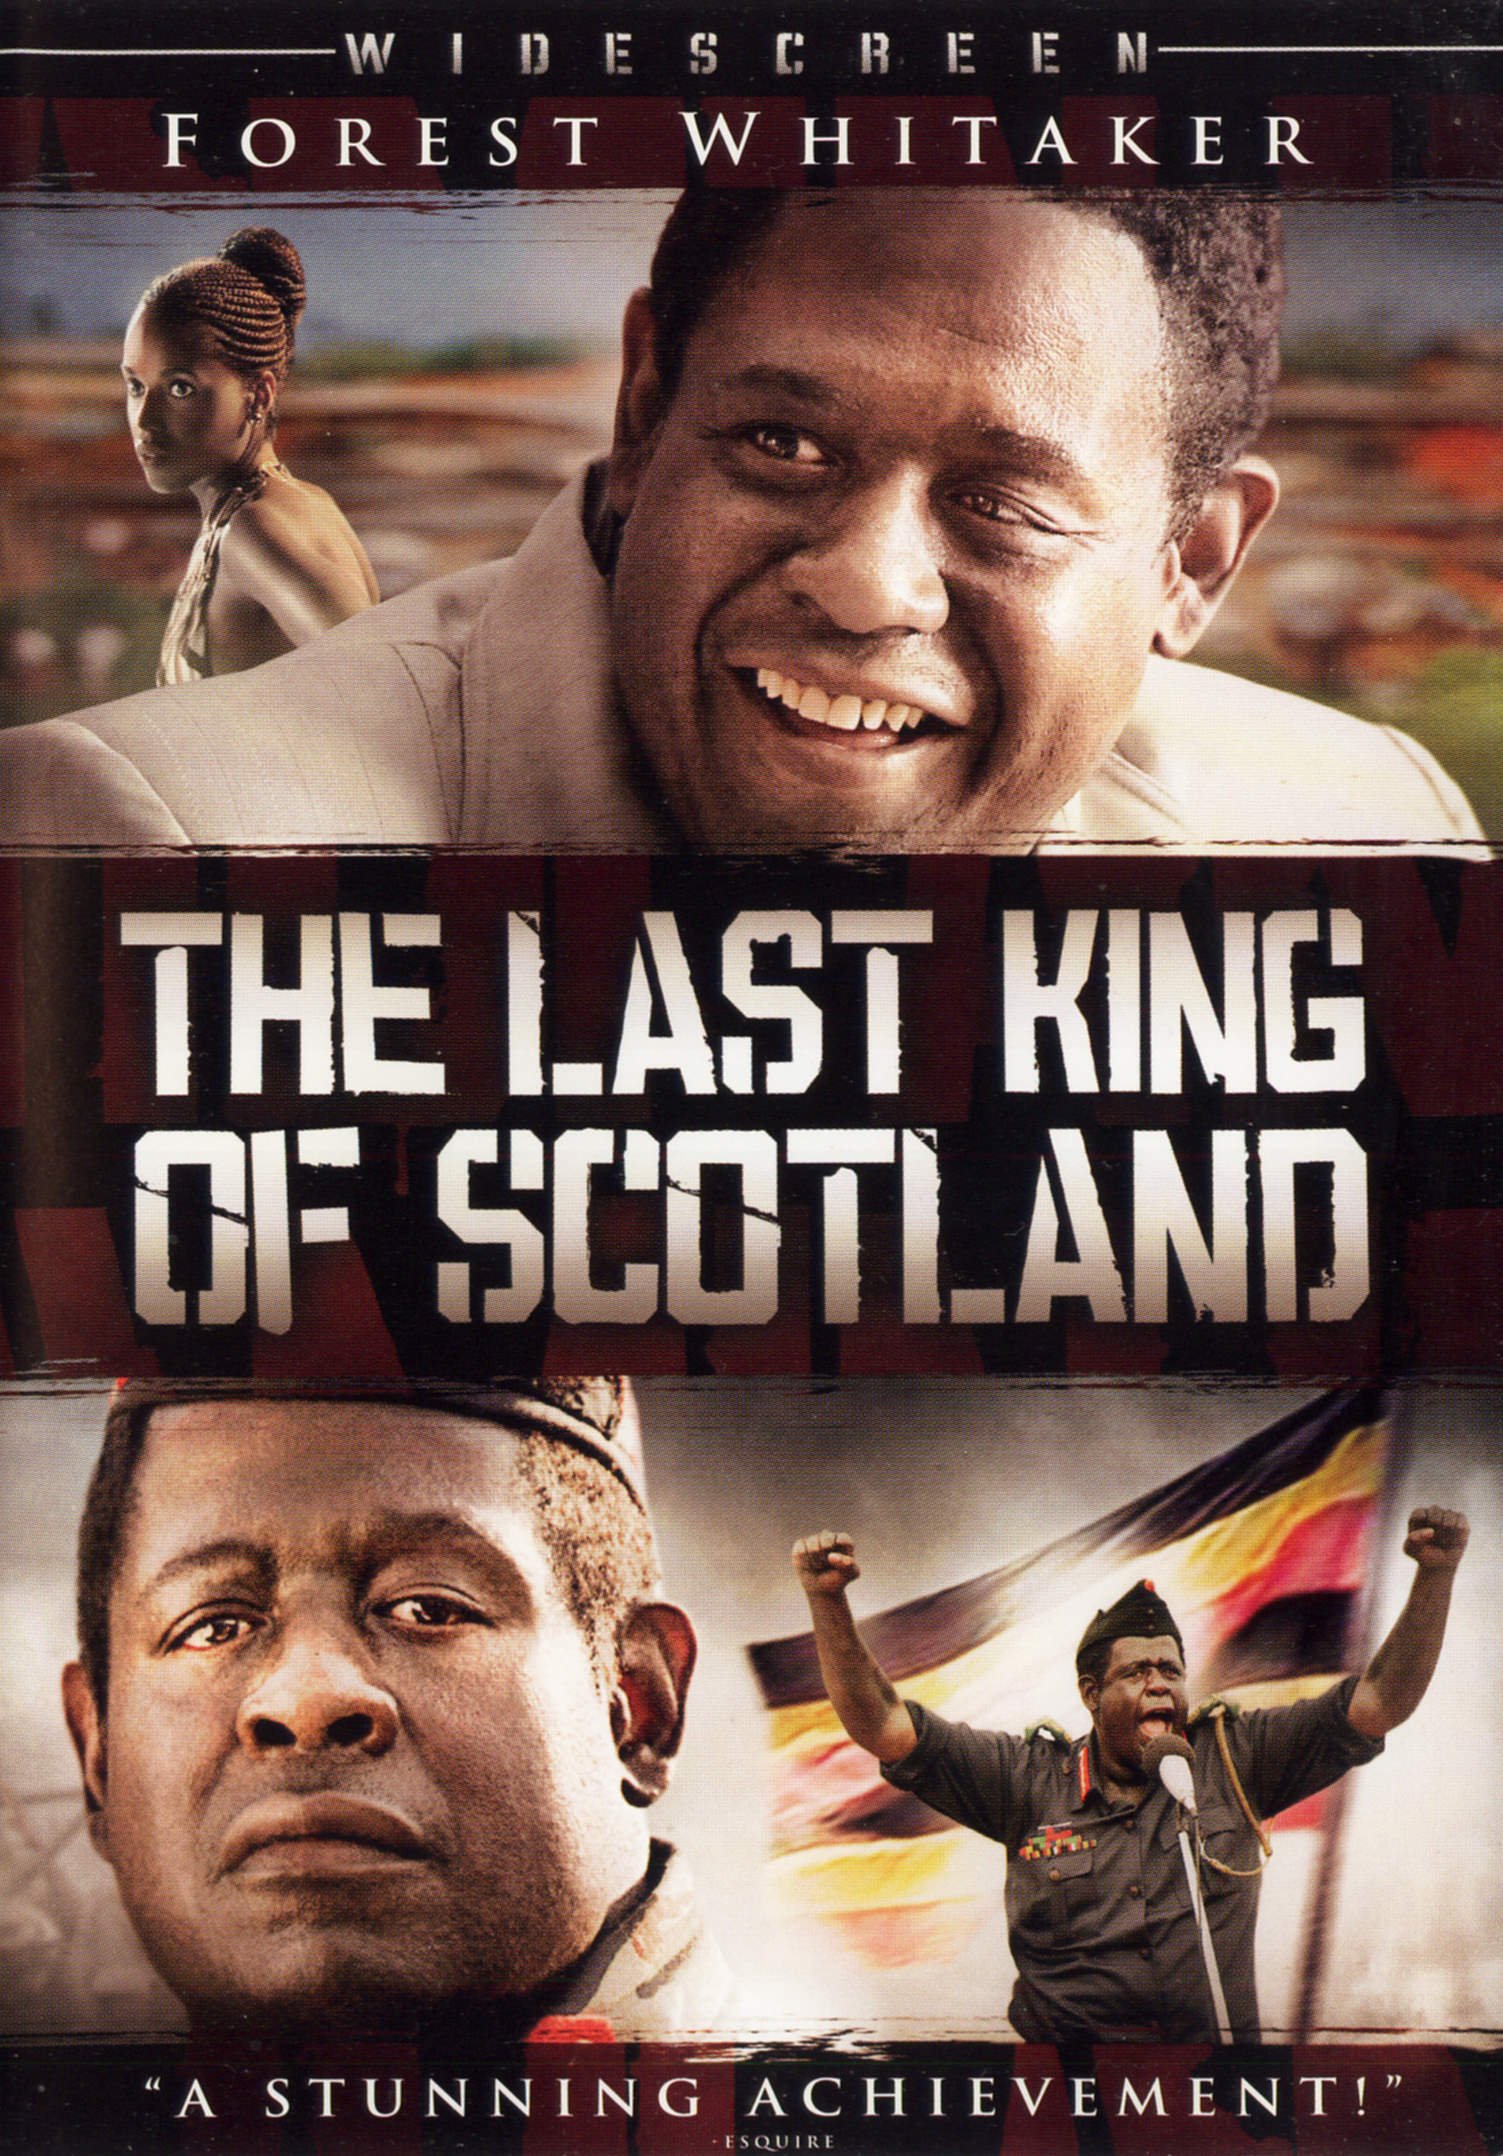 The Last King of Scotland (Widescreen) on MovieShack